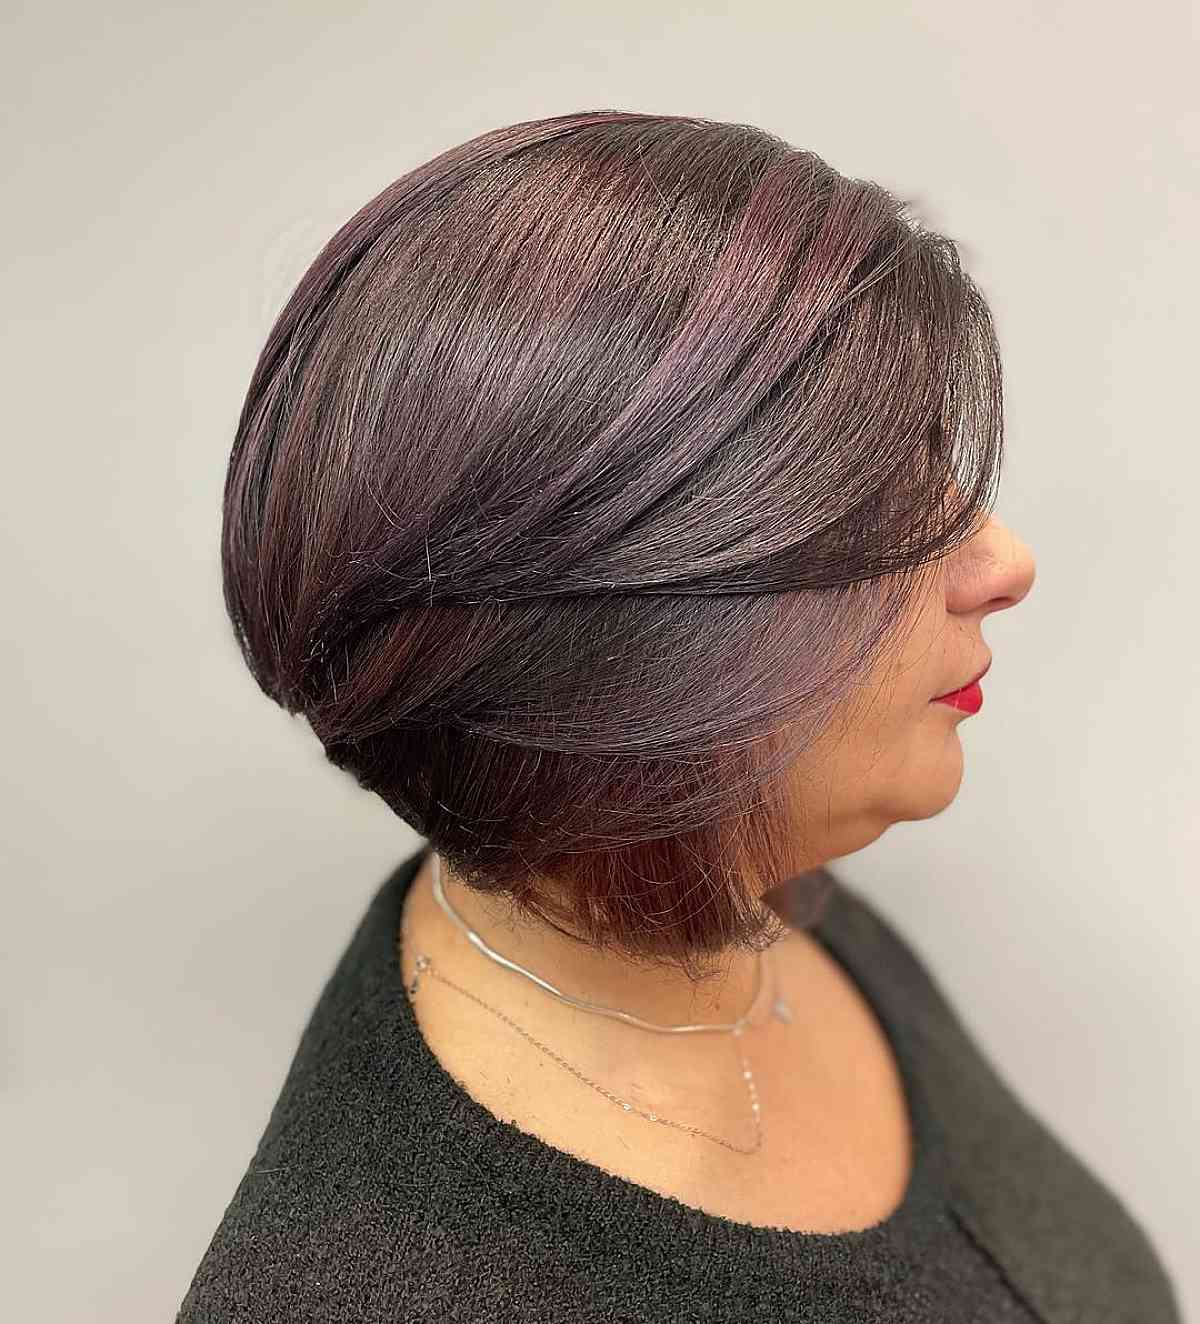 Top 10 Winter Hair Colors for Women In Their 60s (2023 Season)